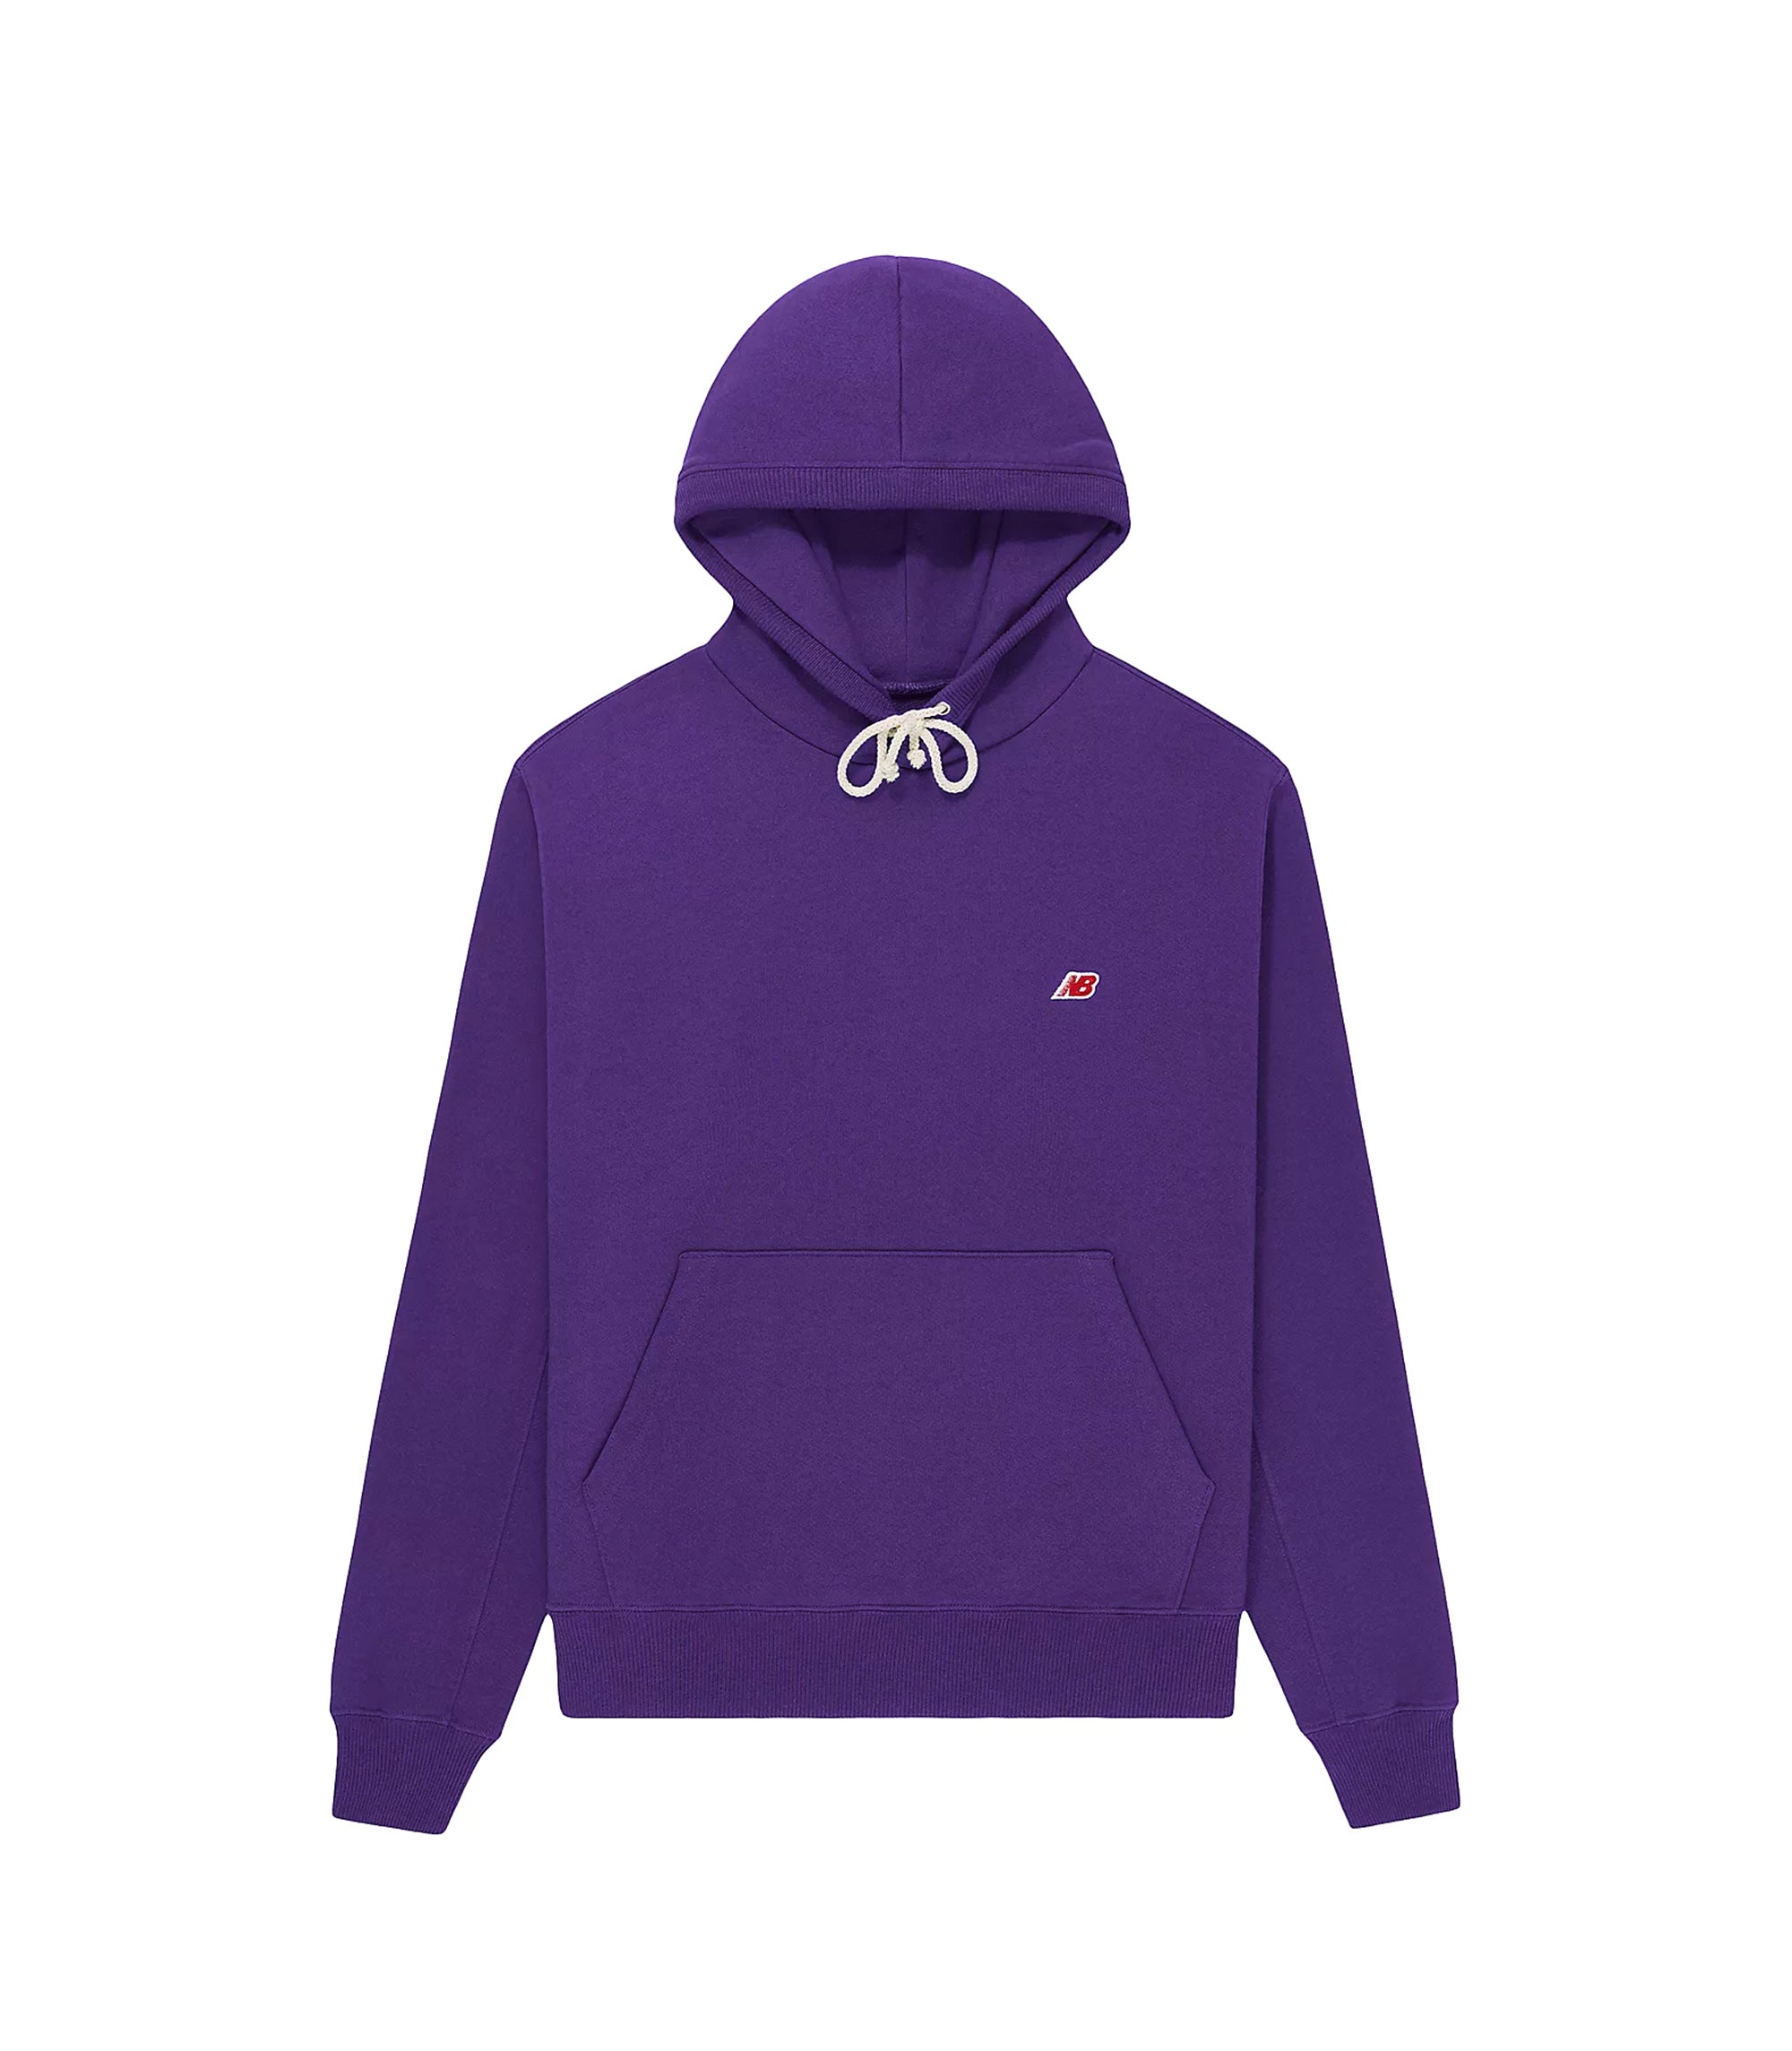 Made in USA Hoodie - Prism Purple